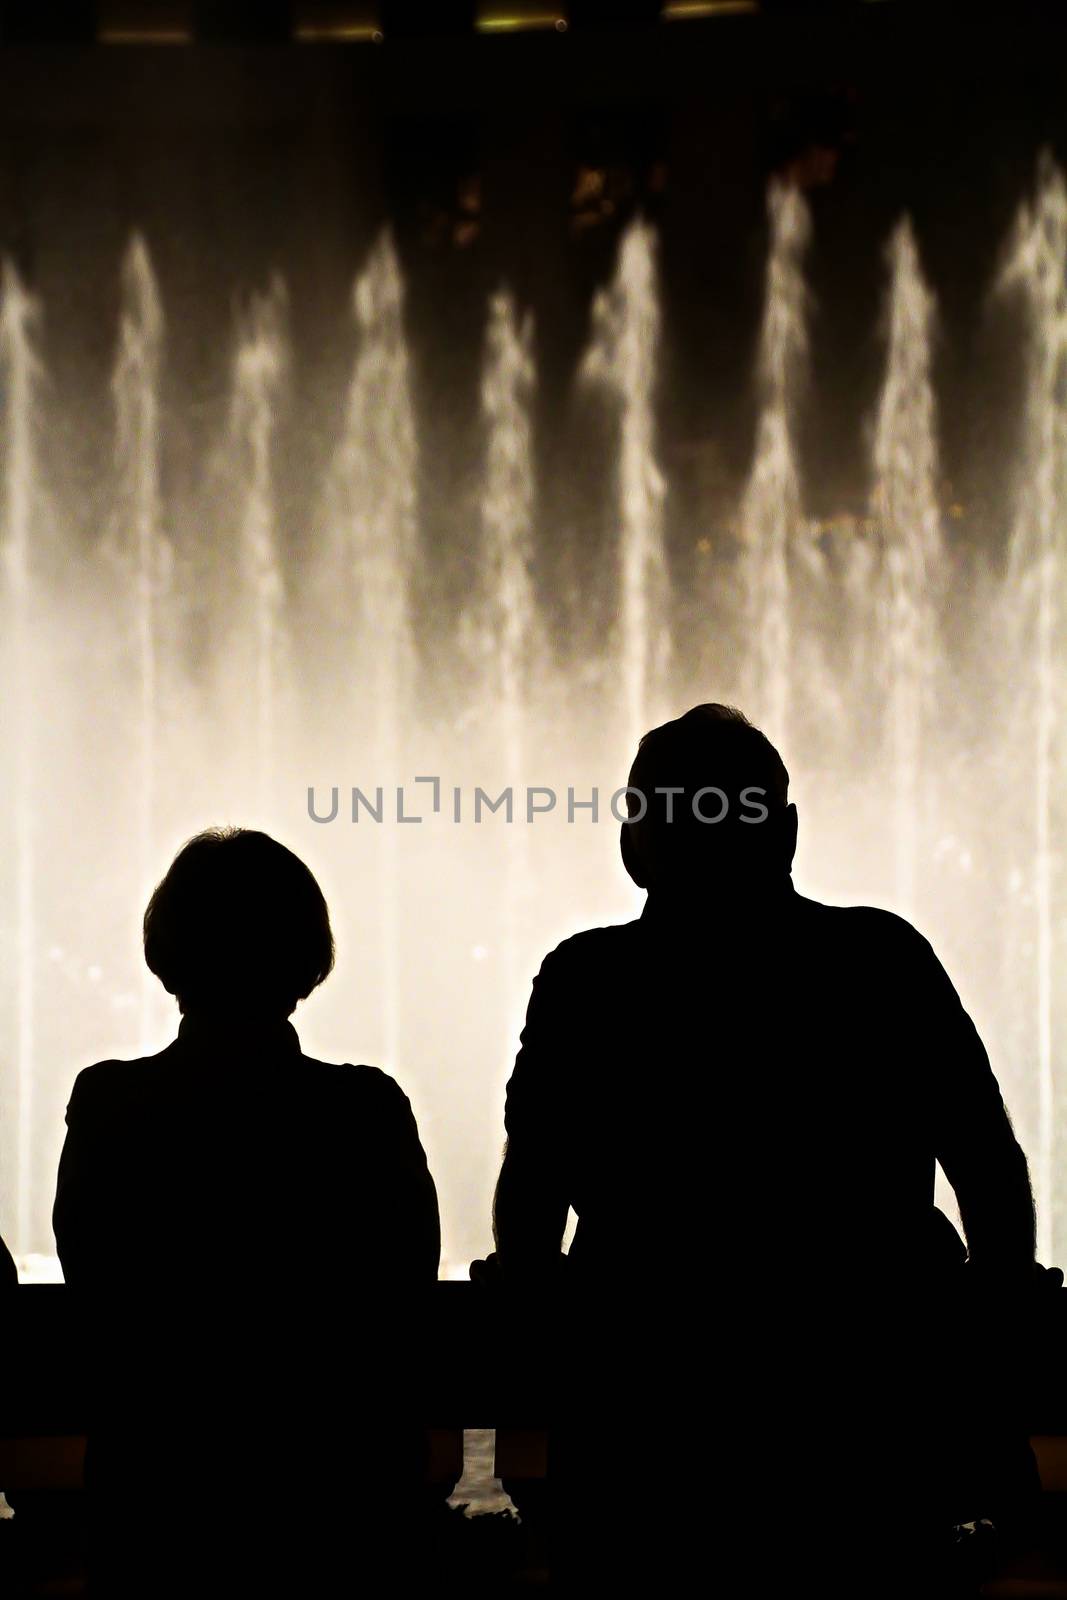 Night scene with silhouettes of people admiring the Bellagio fountains spectacle at Las Vegas by USA-TARO